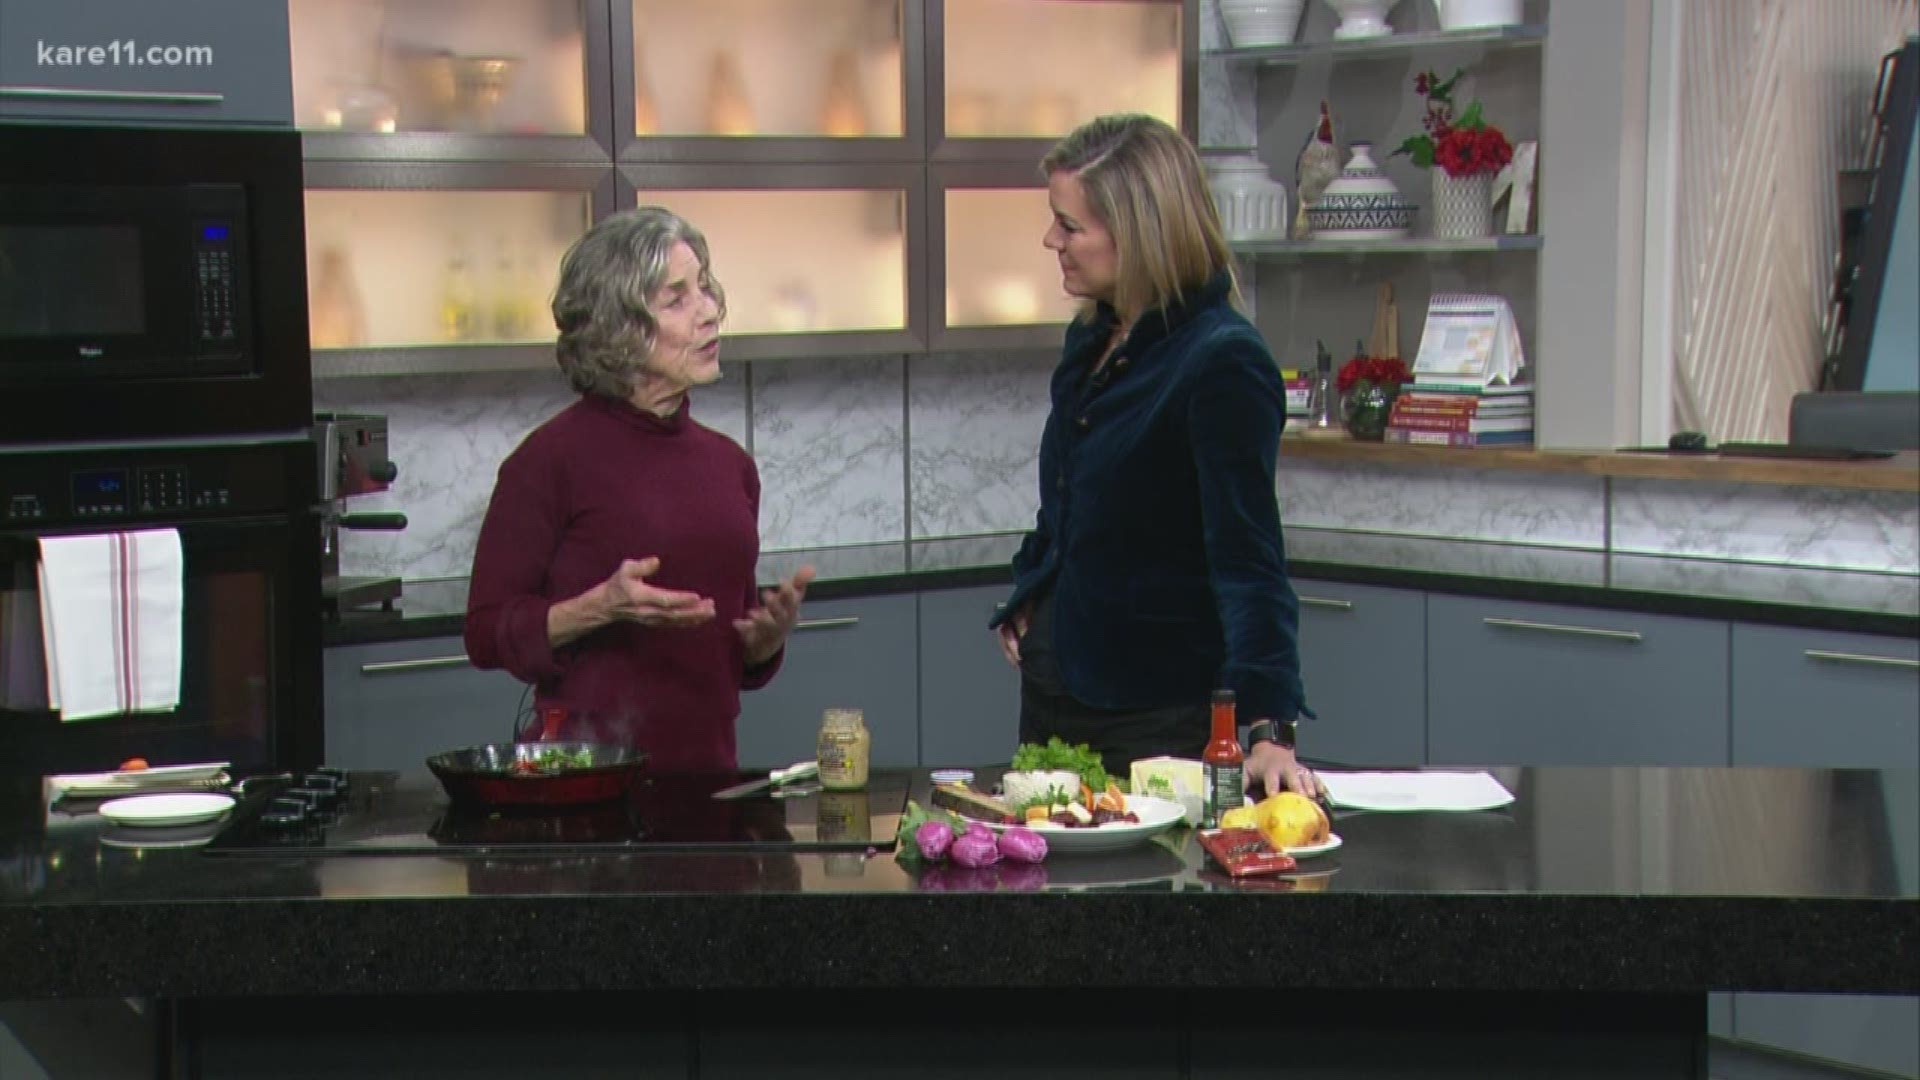 Beth Dooley shows us a Valentine's Day recipe: 'Beautiful Steak Diane for Two.'